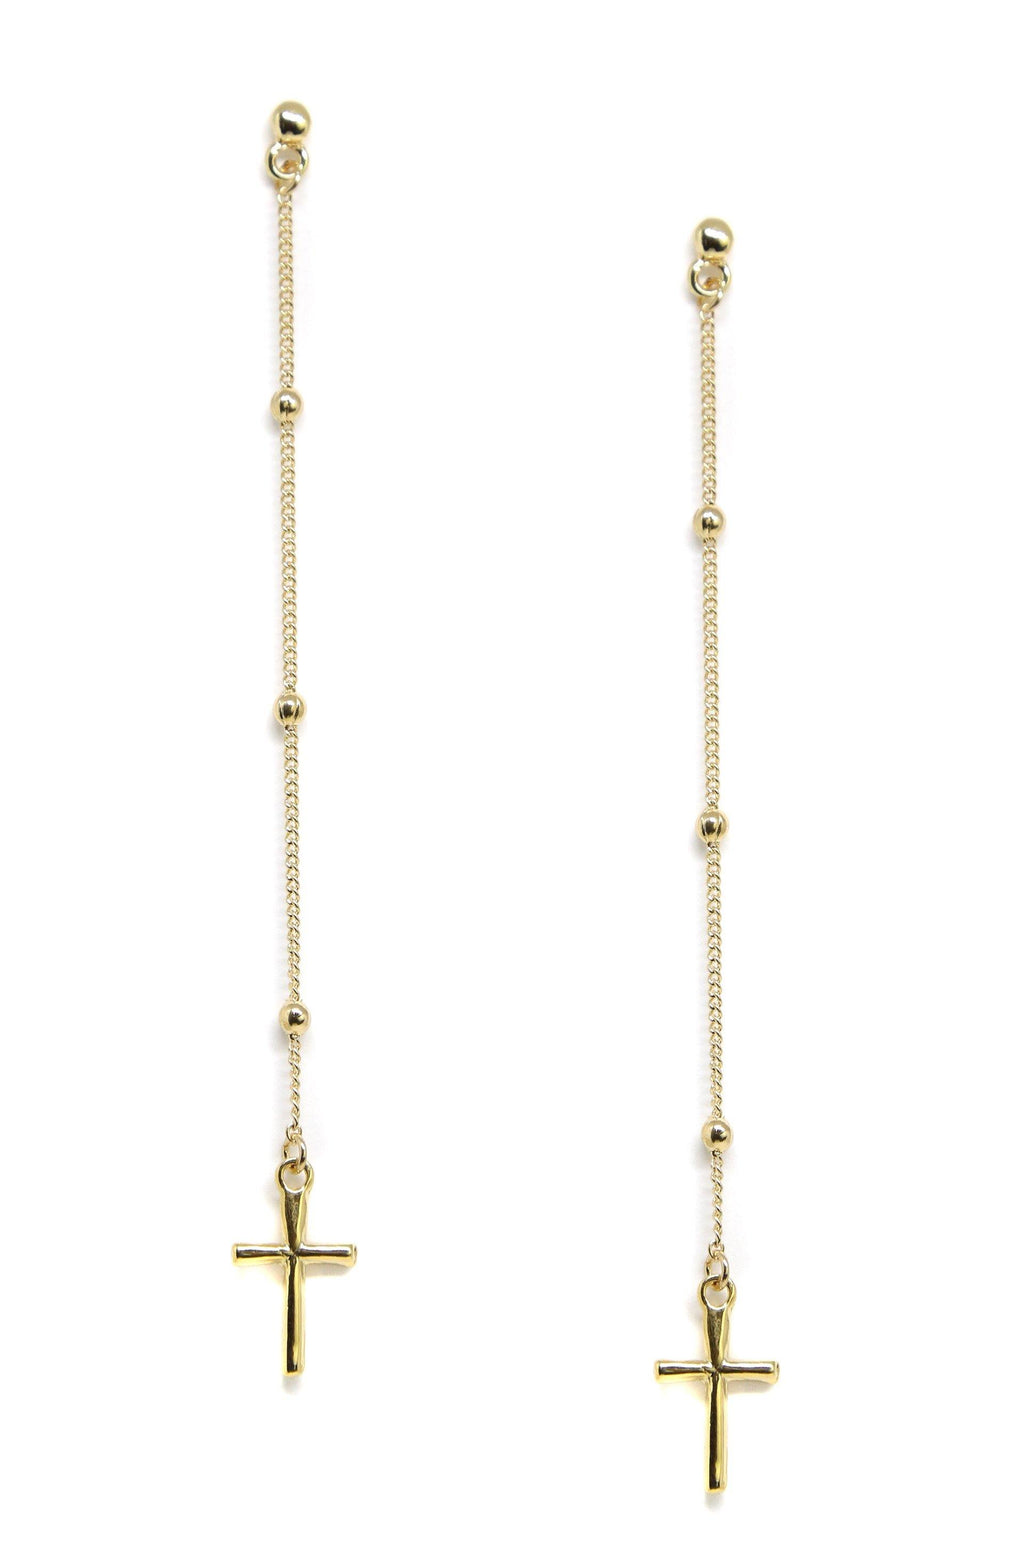 Chance and Faith 18k Gold Plated Dainty Cross Earrings - The Gallant Way